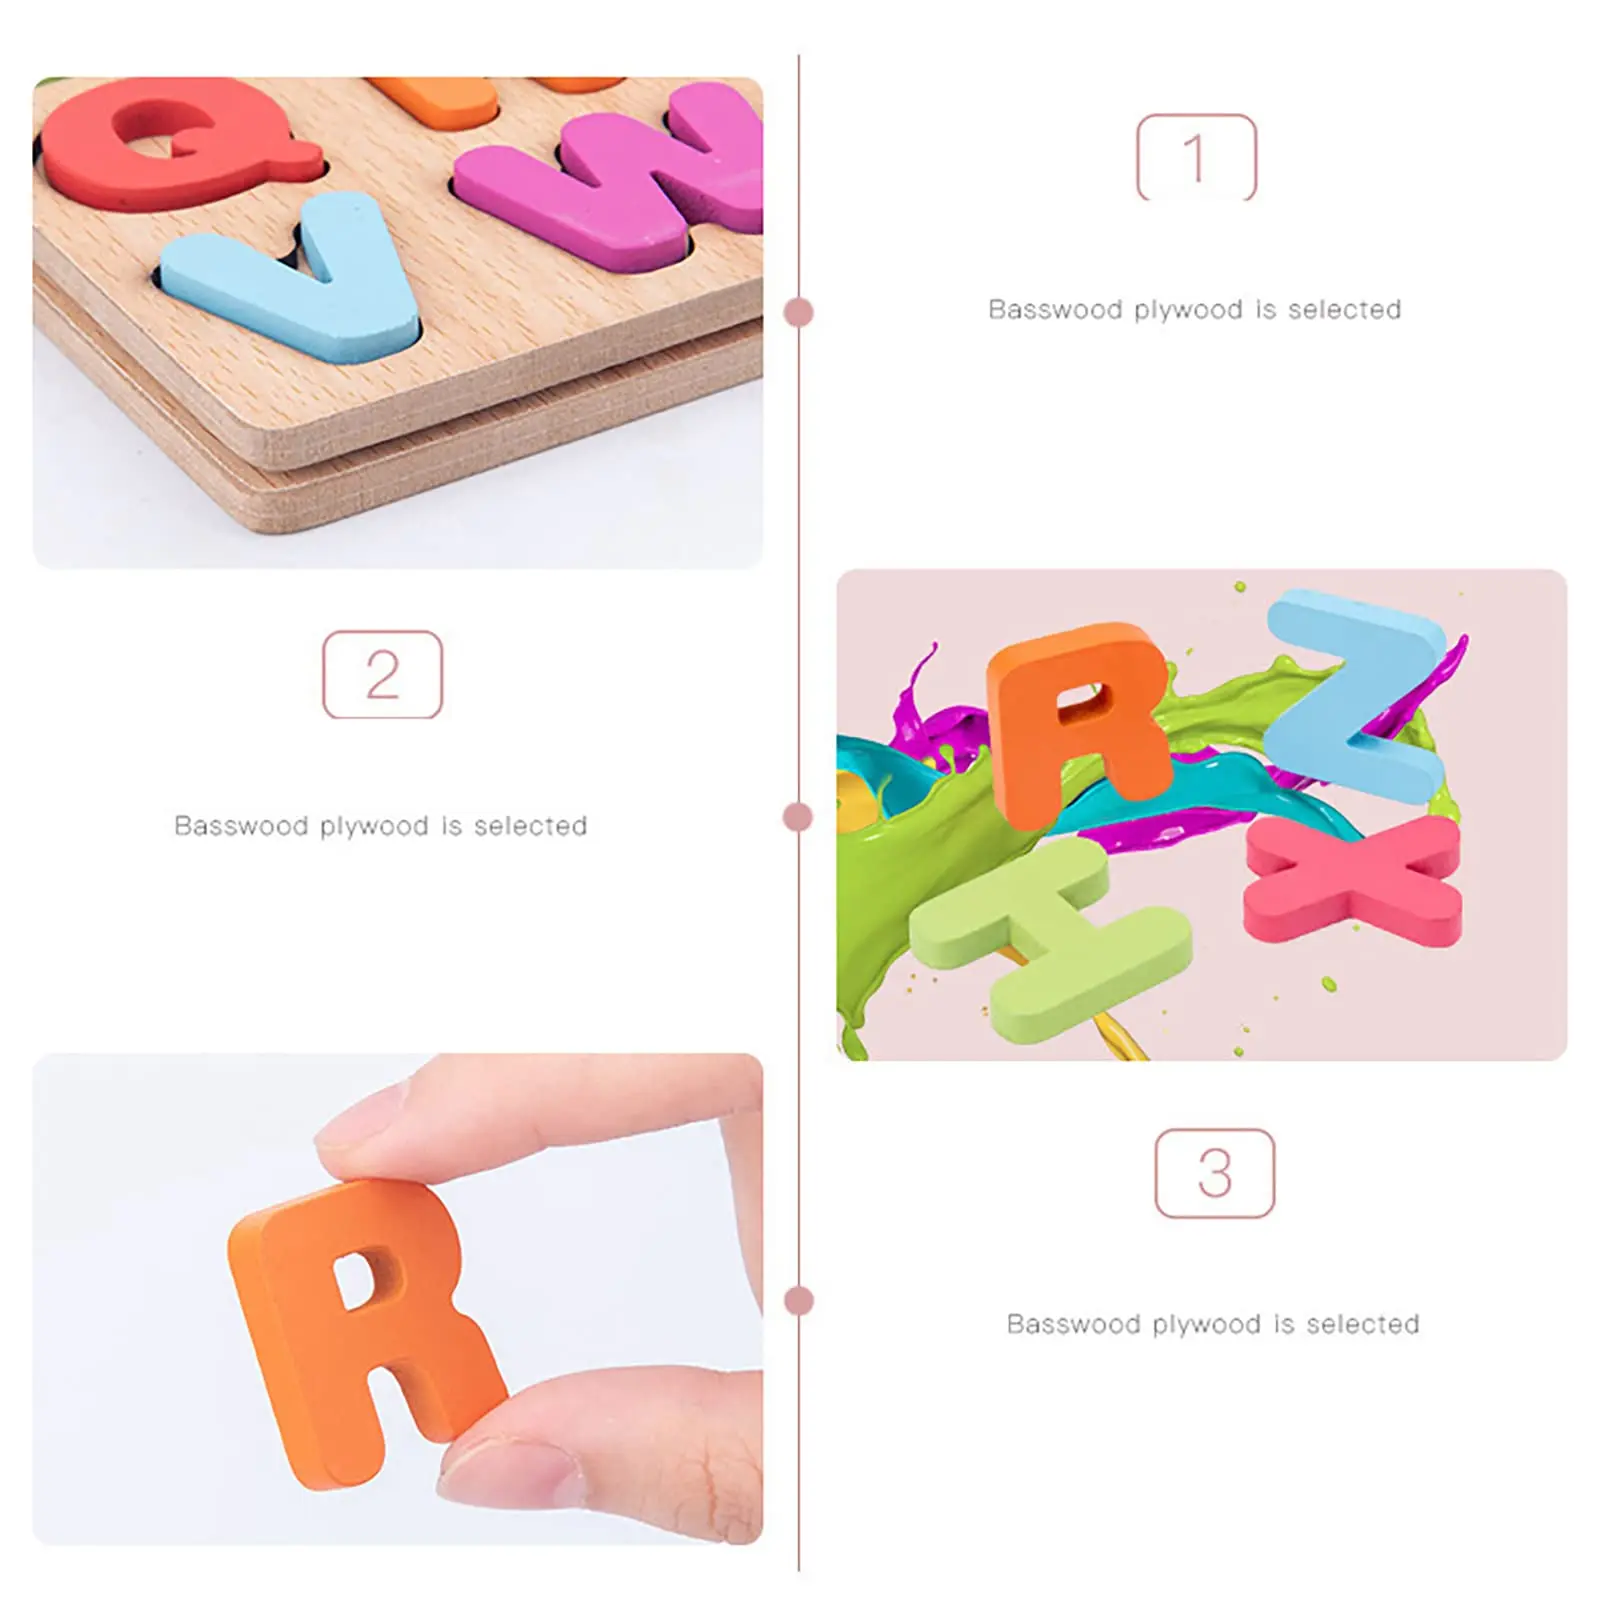 https://ae01.alicdn.com/kf/S9bb94680d1a649e3b76a3939ccc99a05Z/Wooden-Puzzles-for-Children-Alphabet-Shape-Nmber-Puzzle-Board-Game-Educational-Montessori-Toys-for-Kids-3.jpg